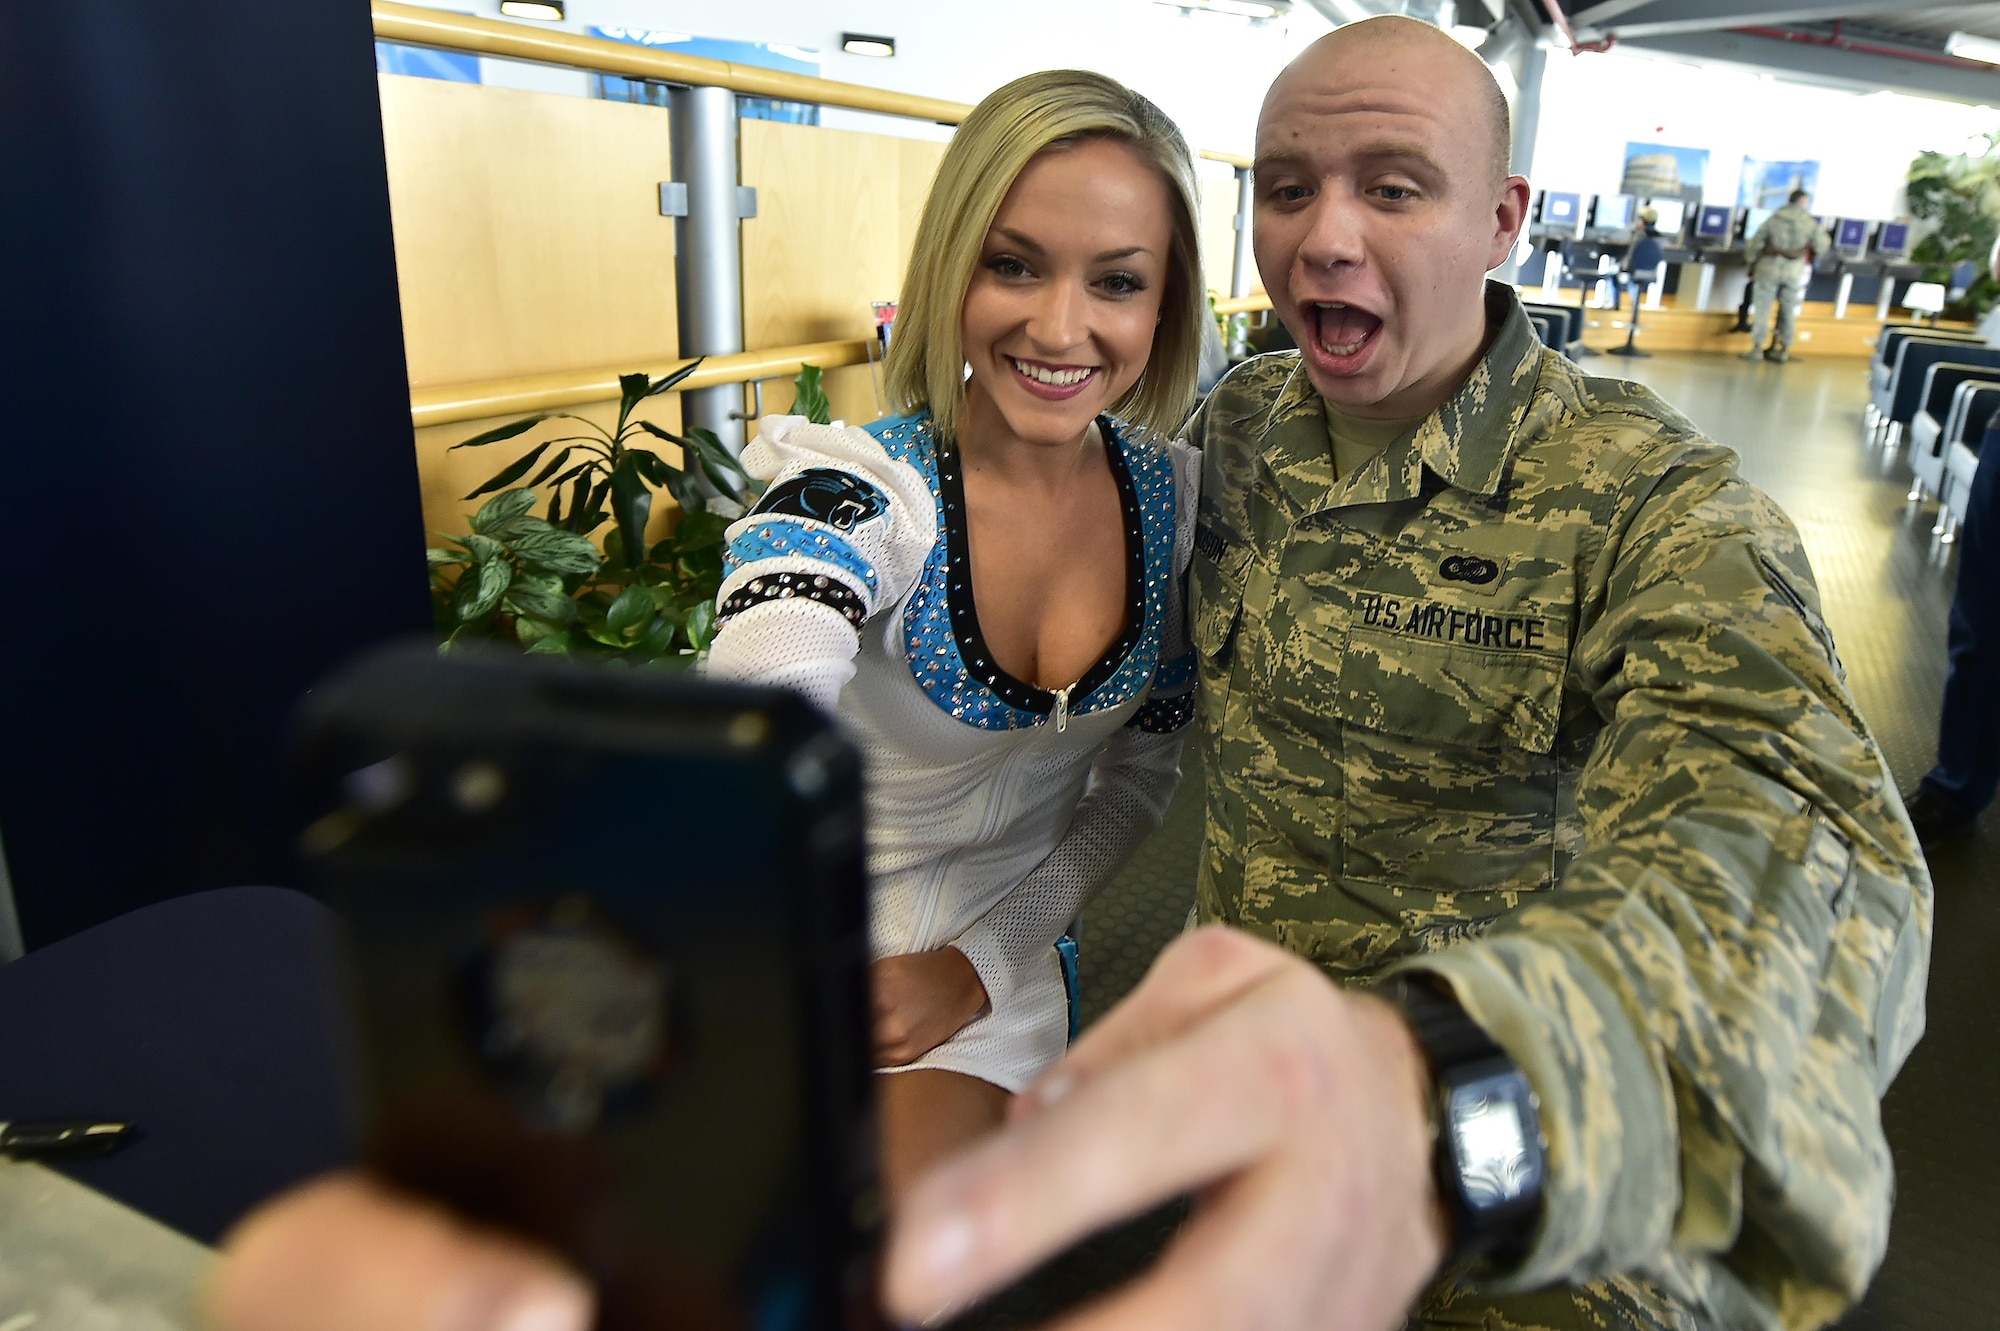 U.S. Air Force Airman 1st Class Sean Hudson, American Forces Network Sembach broadcast journalist, takes a selfie with Top Cats cheerleader Megan Schlosser during a meet and greet at the 721st Aerial Port Squadron’s Passenger Terminal on Ramstein Air Base, Germany, March 6, 2017. Five Panthers players and two cheerleaders traveled from Charlotte, North Carolina, to Germany as part of a United Services Organization tour. (U.S. Air Force photo by Senior Airman Jonathan Bass)